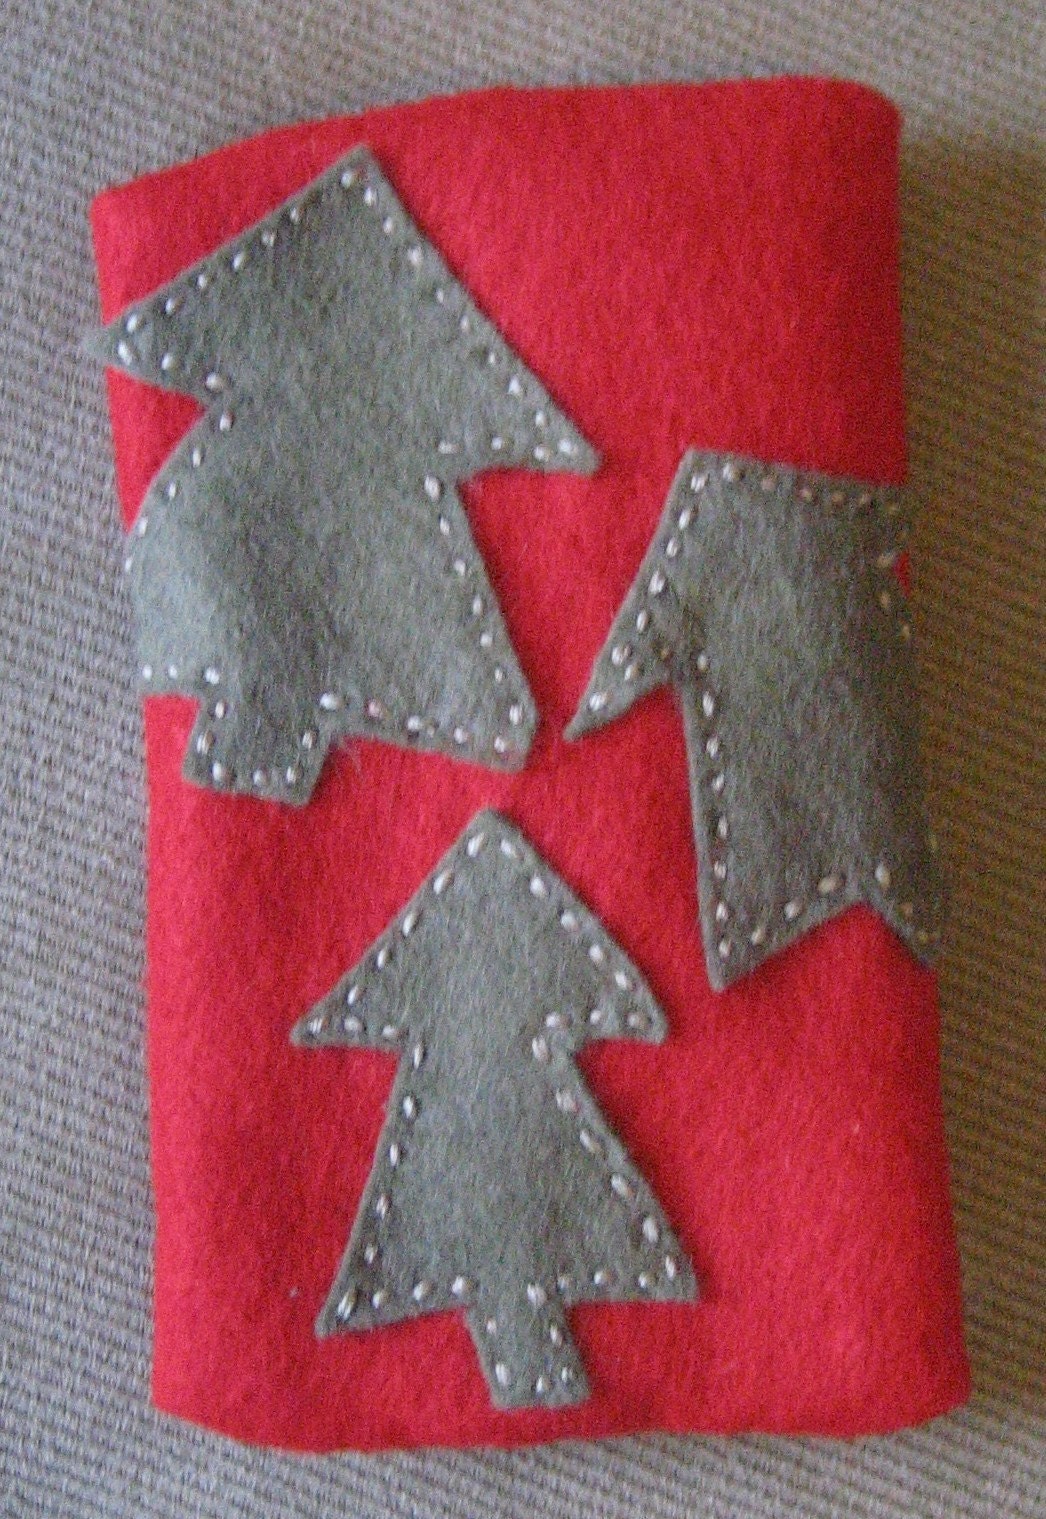 Trees on Red Tissue Cozy